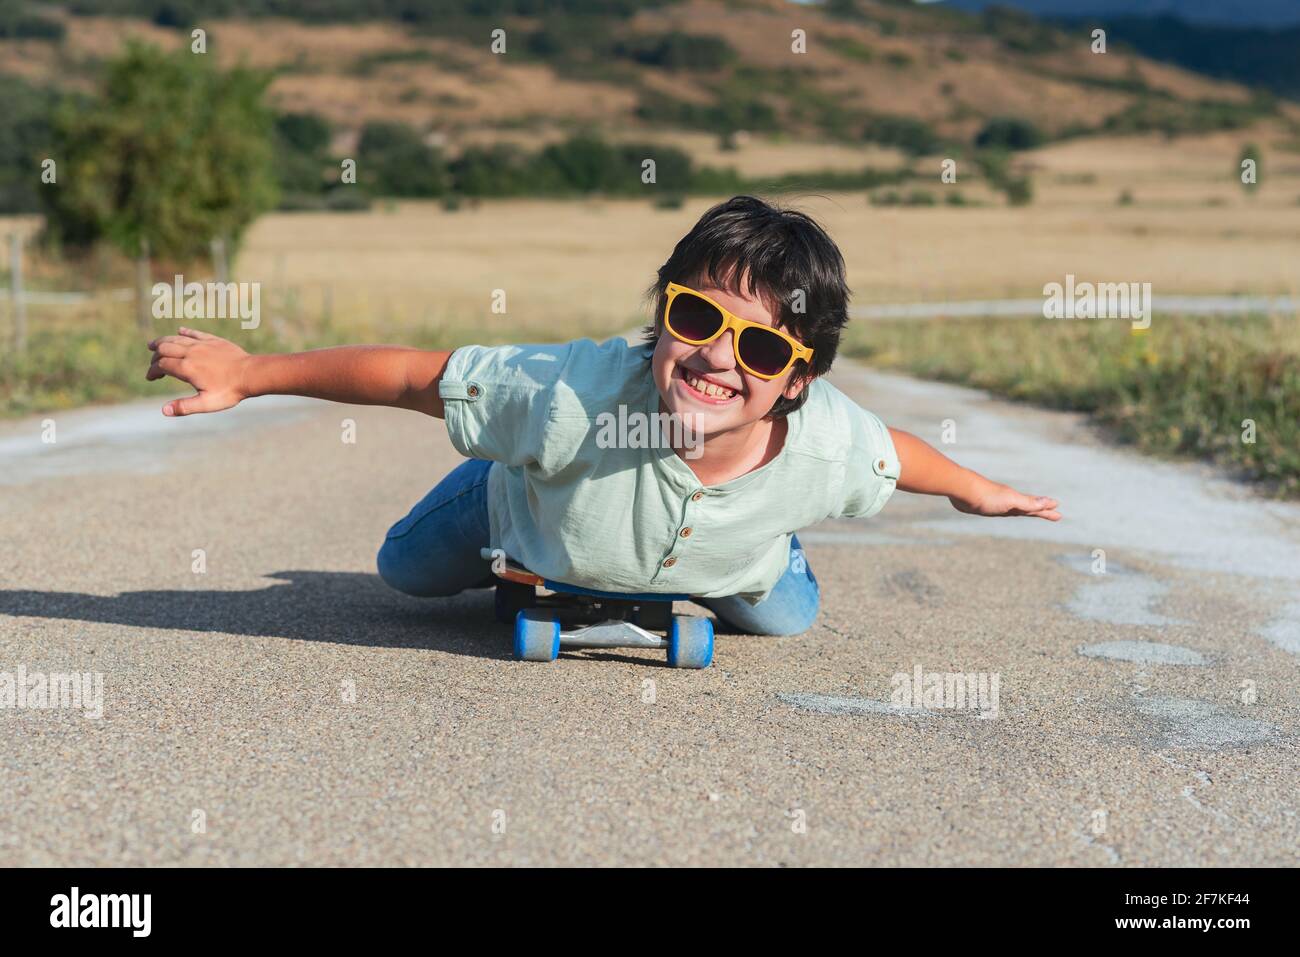 happy kid with skateboard and sunglasses on the road outdoor Stock Photo